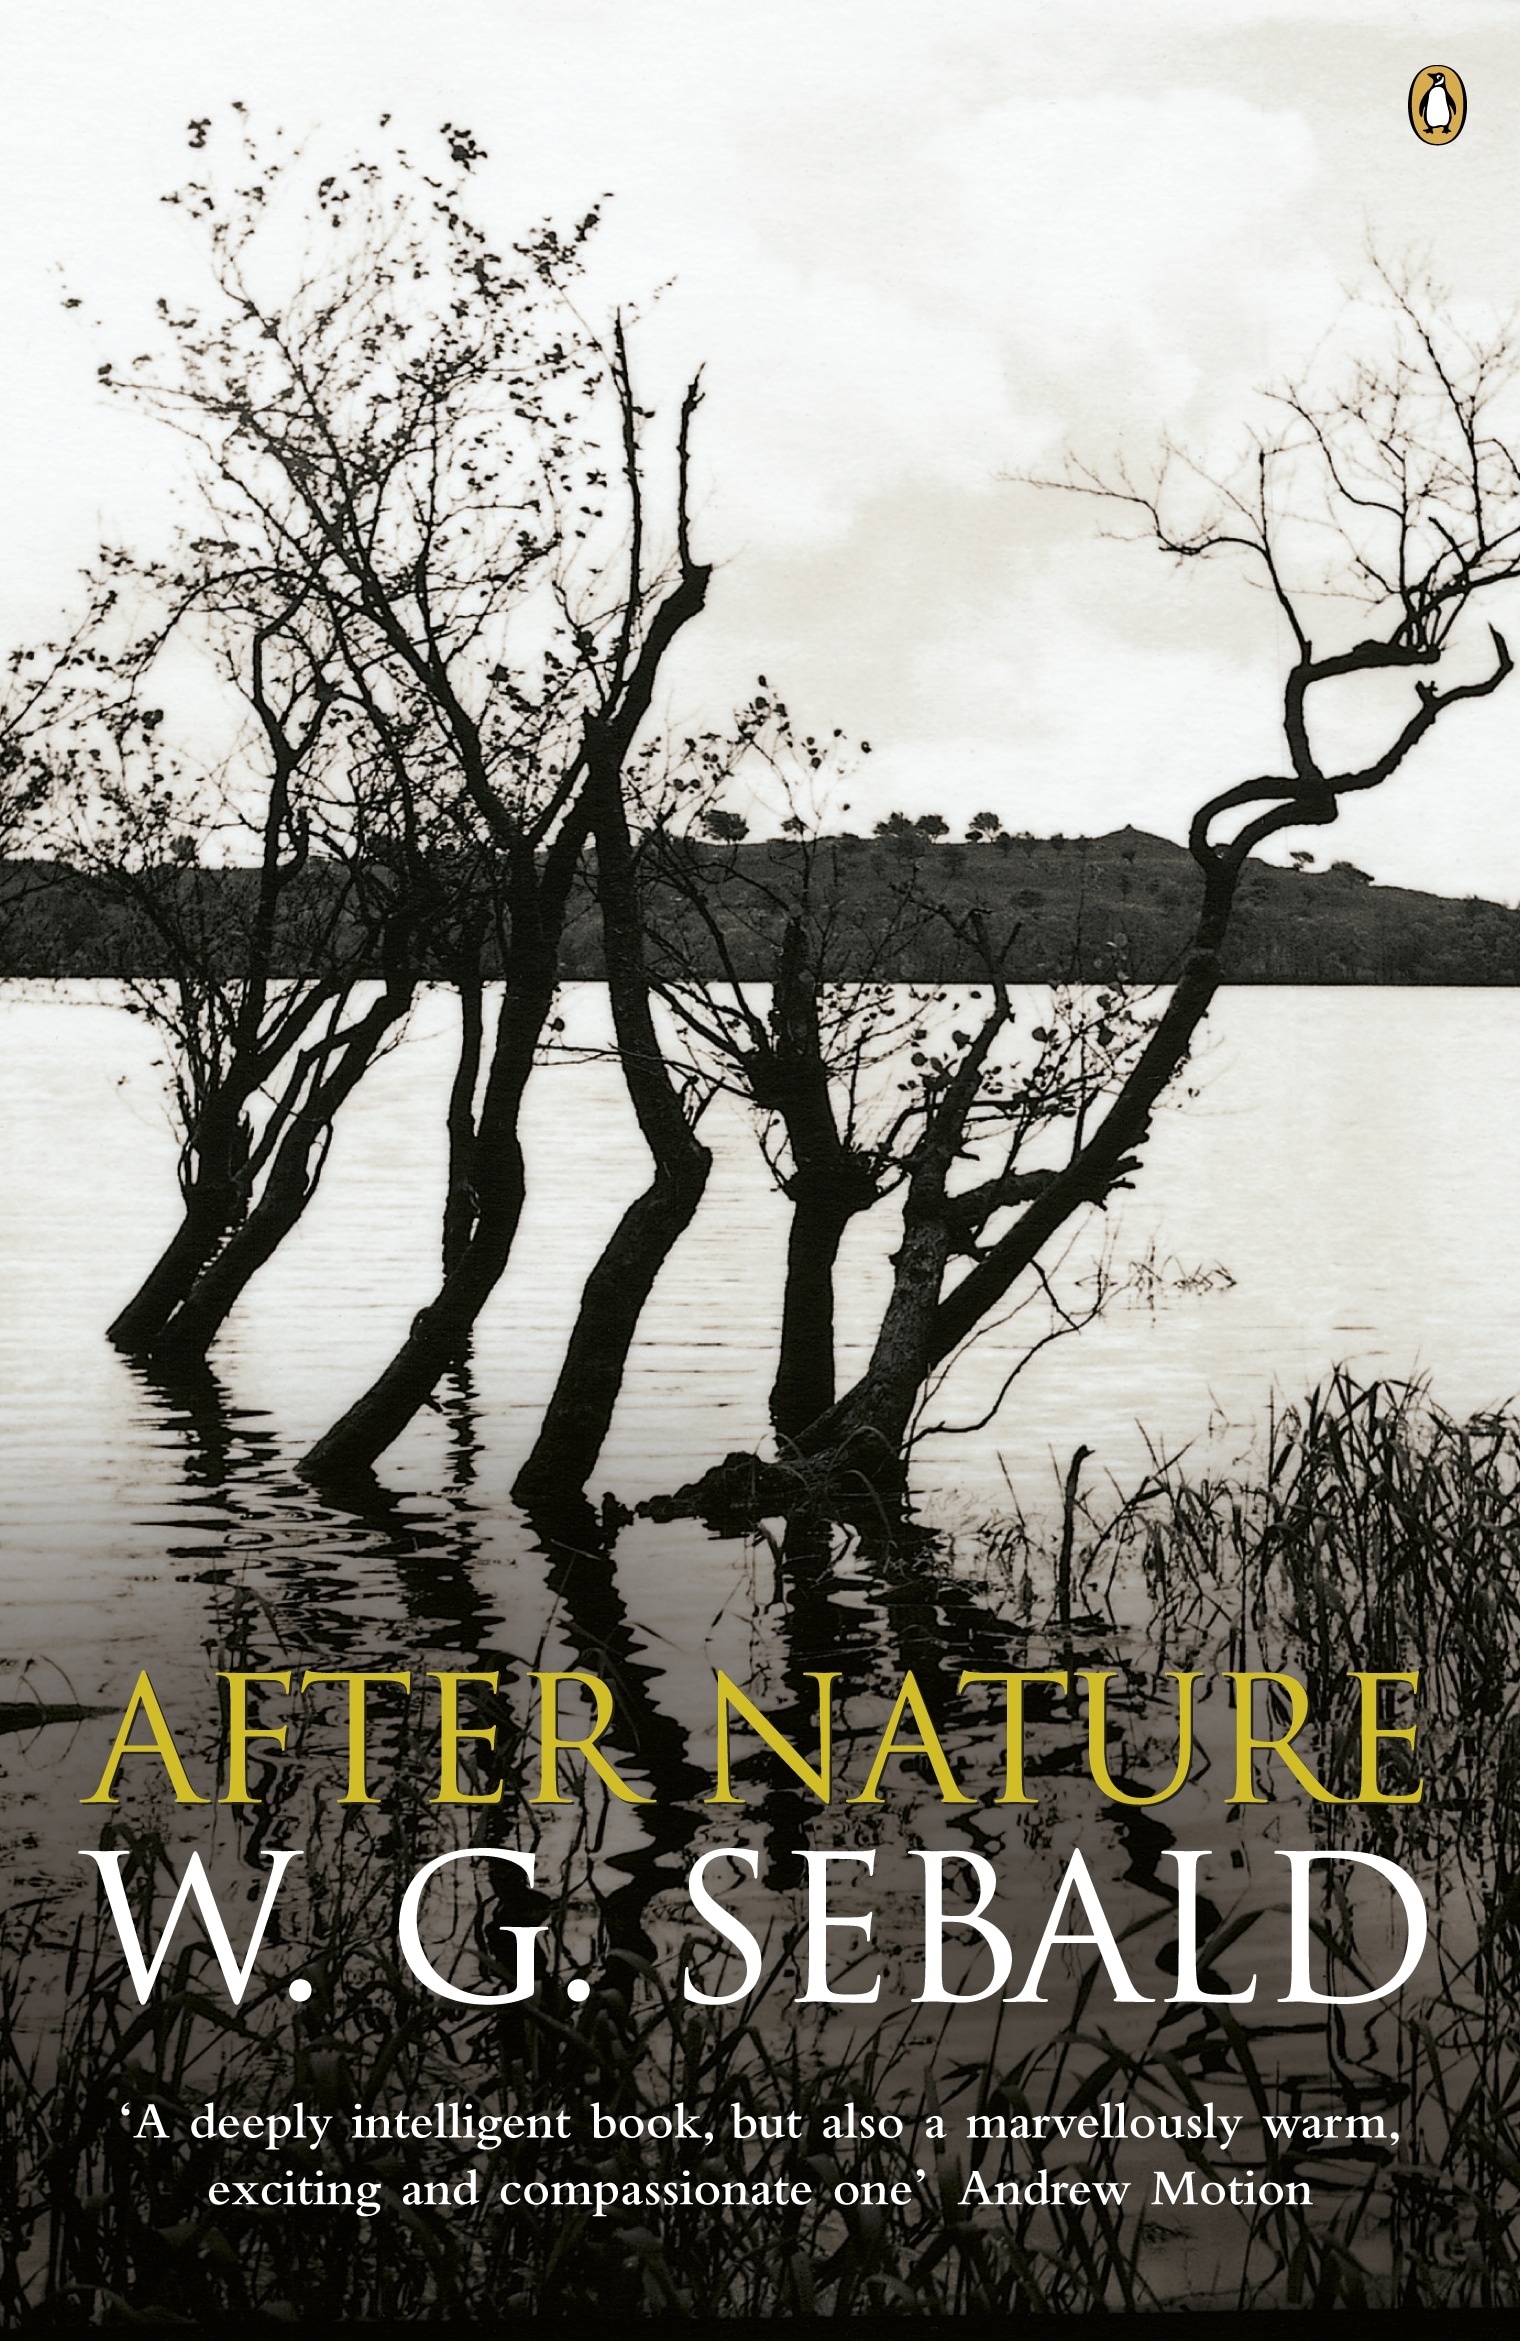 Book “After Nature” by W. G. Sebald — June 26, 2003